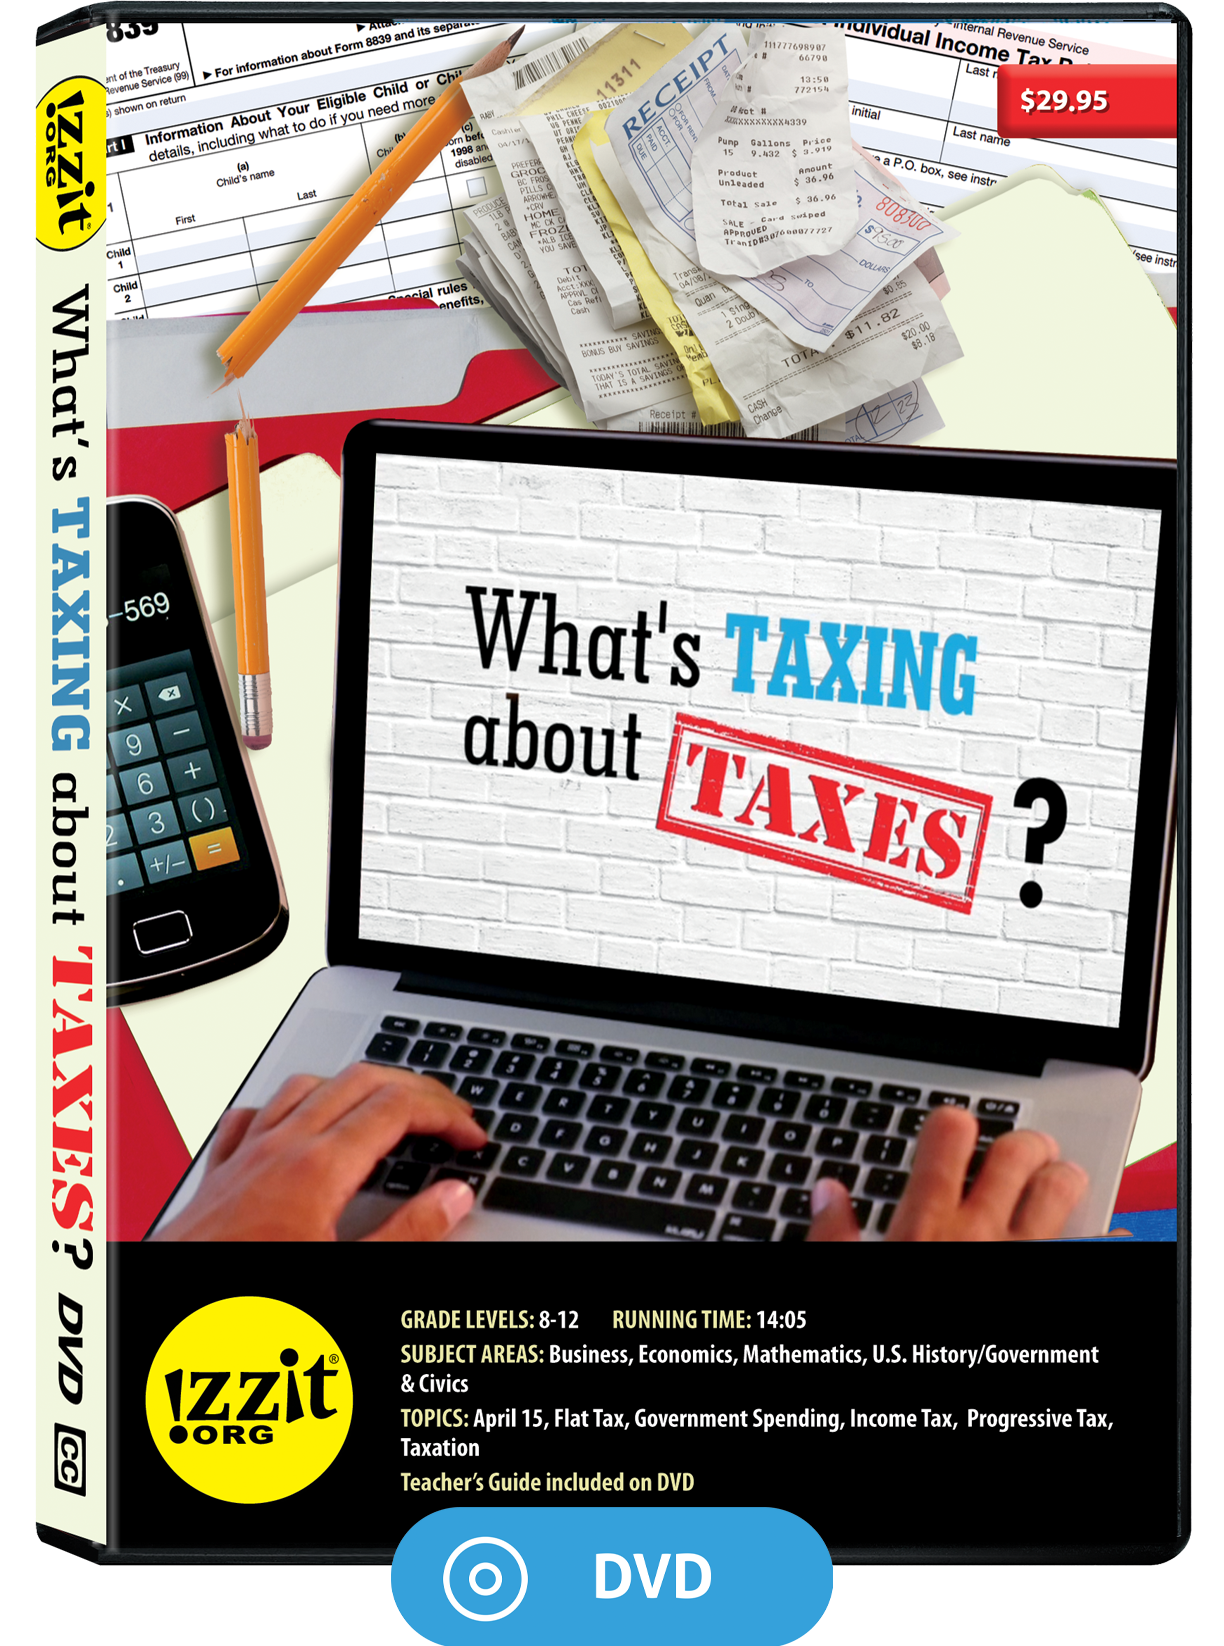 What's so Taxing about Taxes? DVD